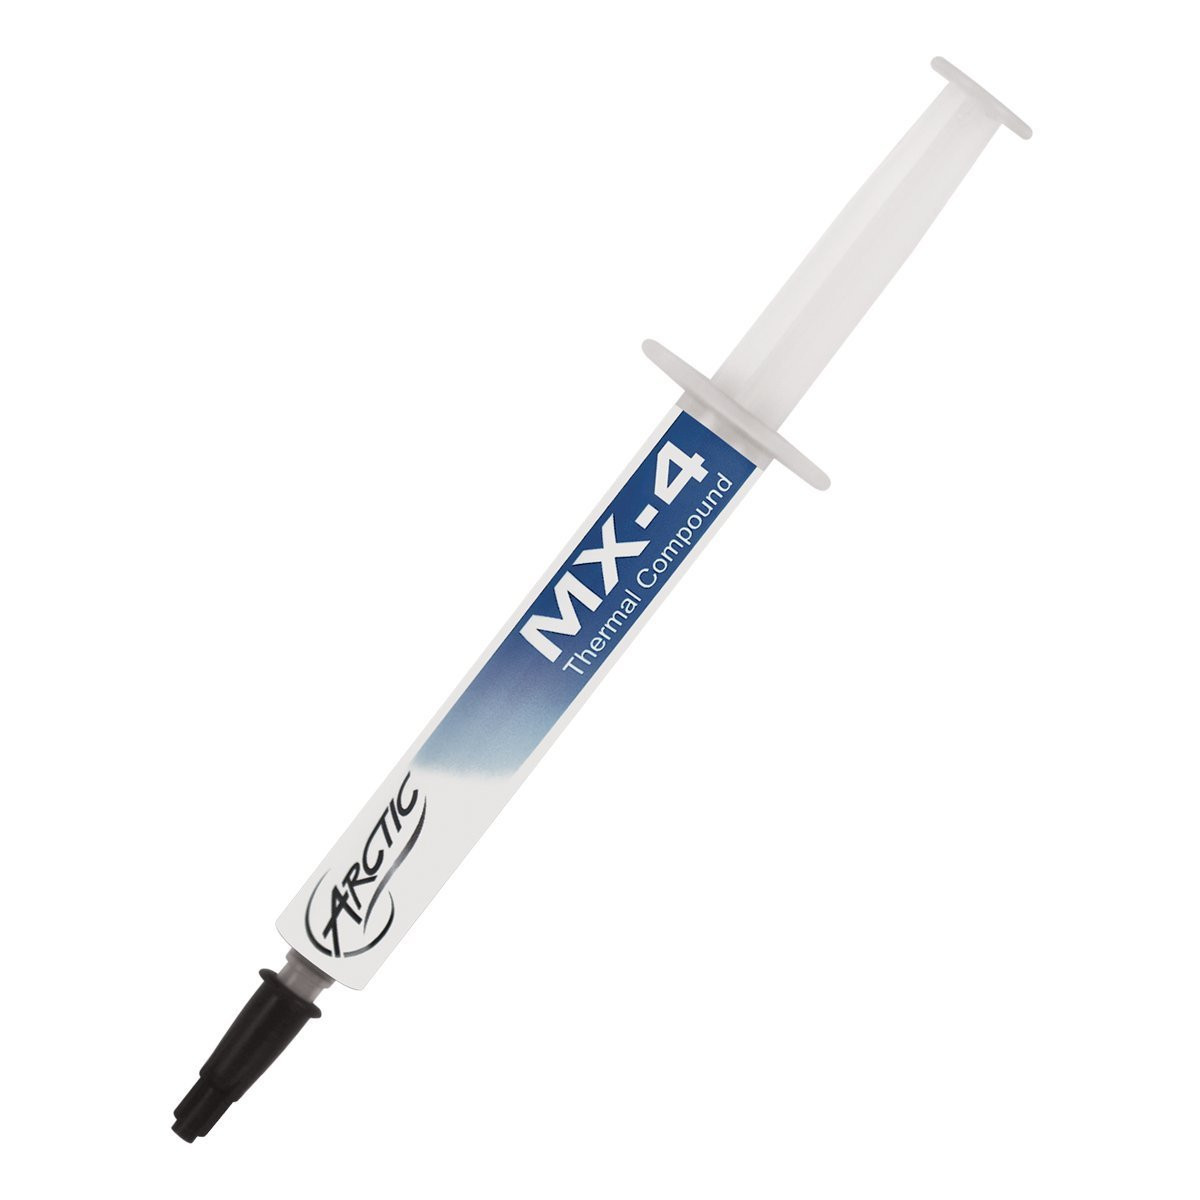 ARCTIC MX-4 Thermal Compound Paste, Carbon Based High Performance, Heatsink  Paste, Thermal Compound CPU for All Coolers